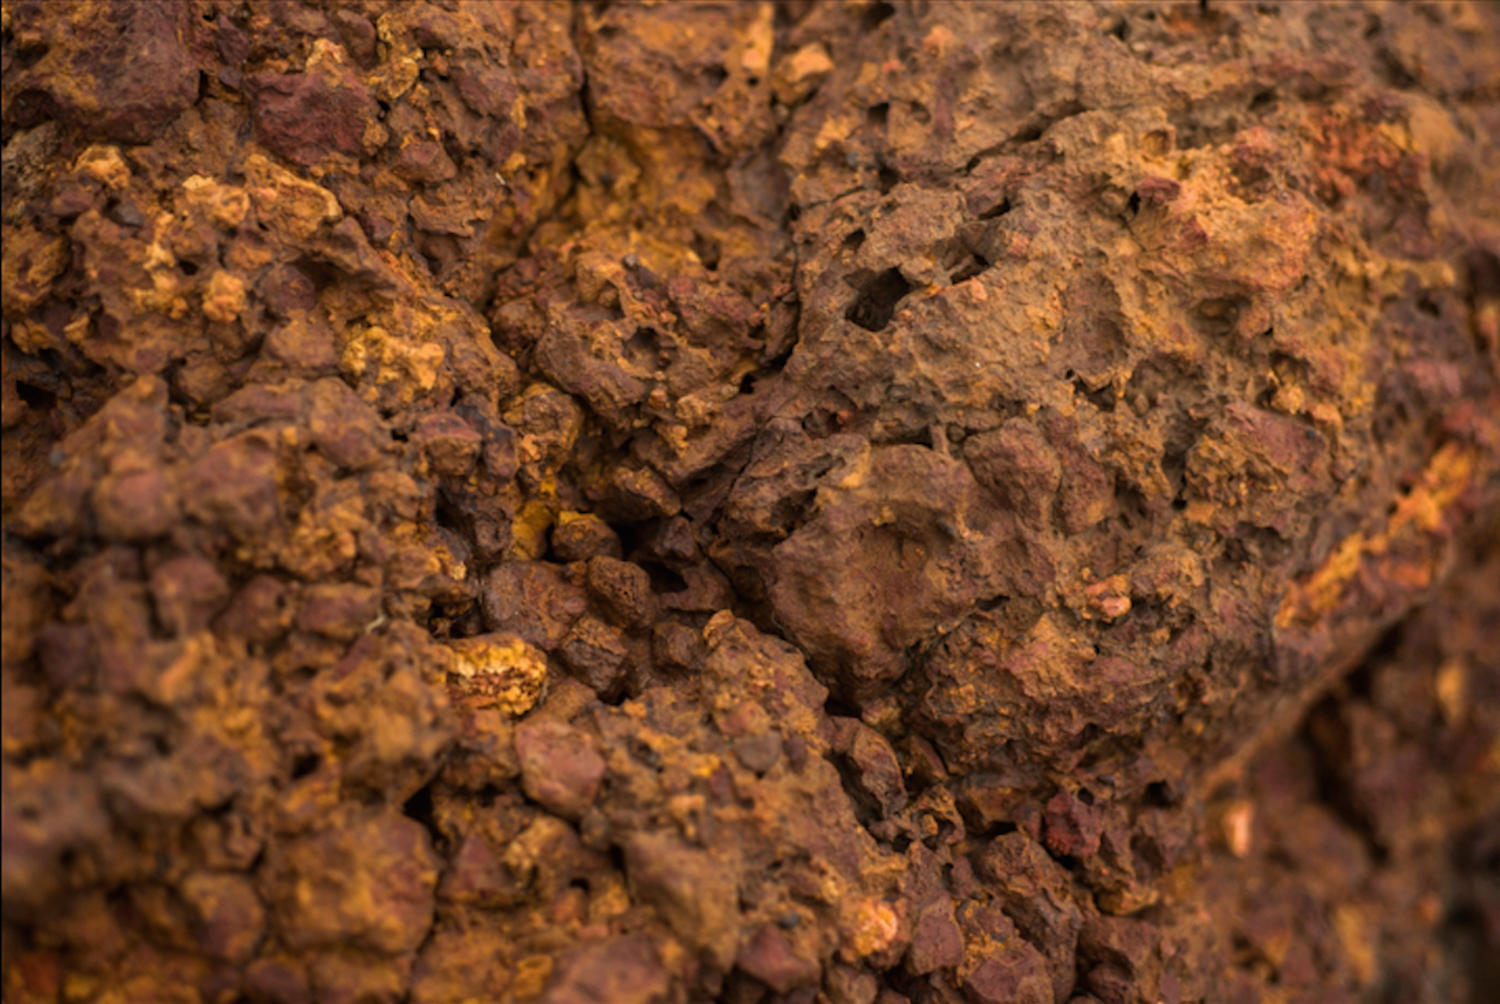  Lateritic soils are rich in aluminium and iron. Rocks on the Chalkewadi plateau, in the Satara district, show typical signs of weathering with the reddish tinges formed by rusting iron. 